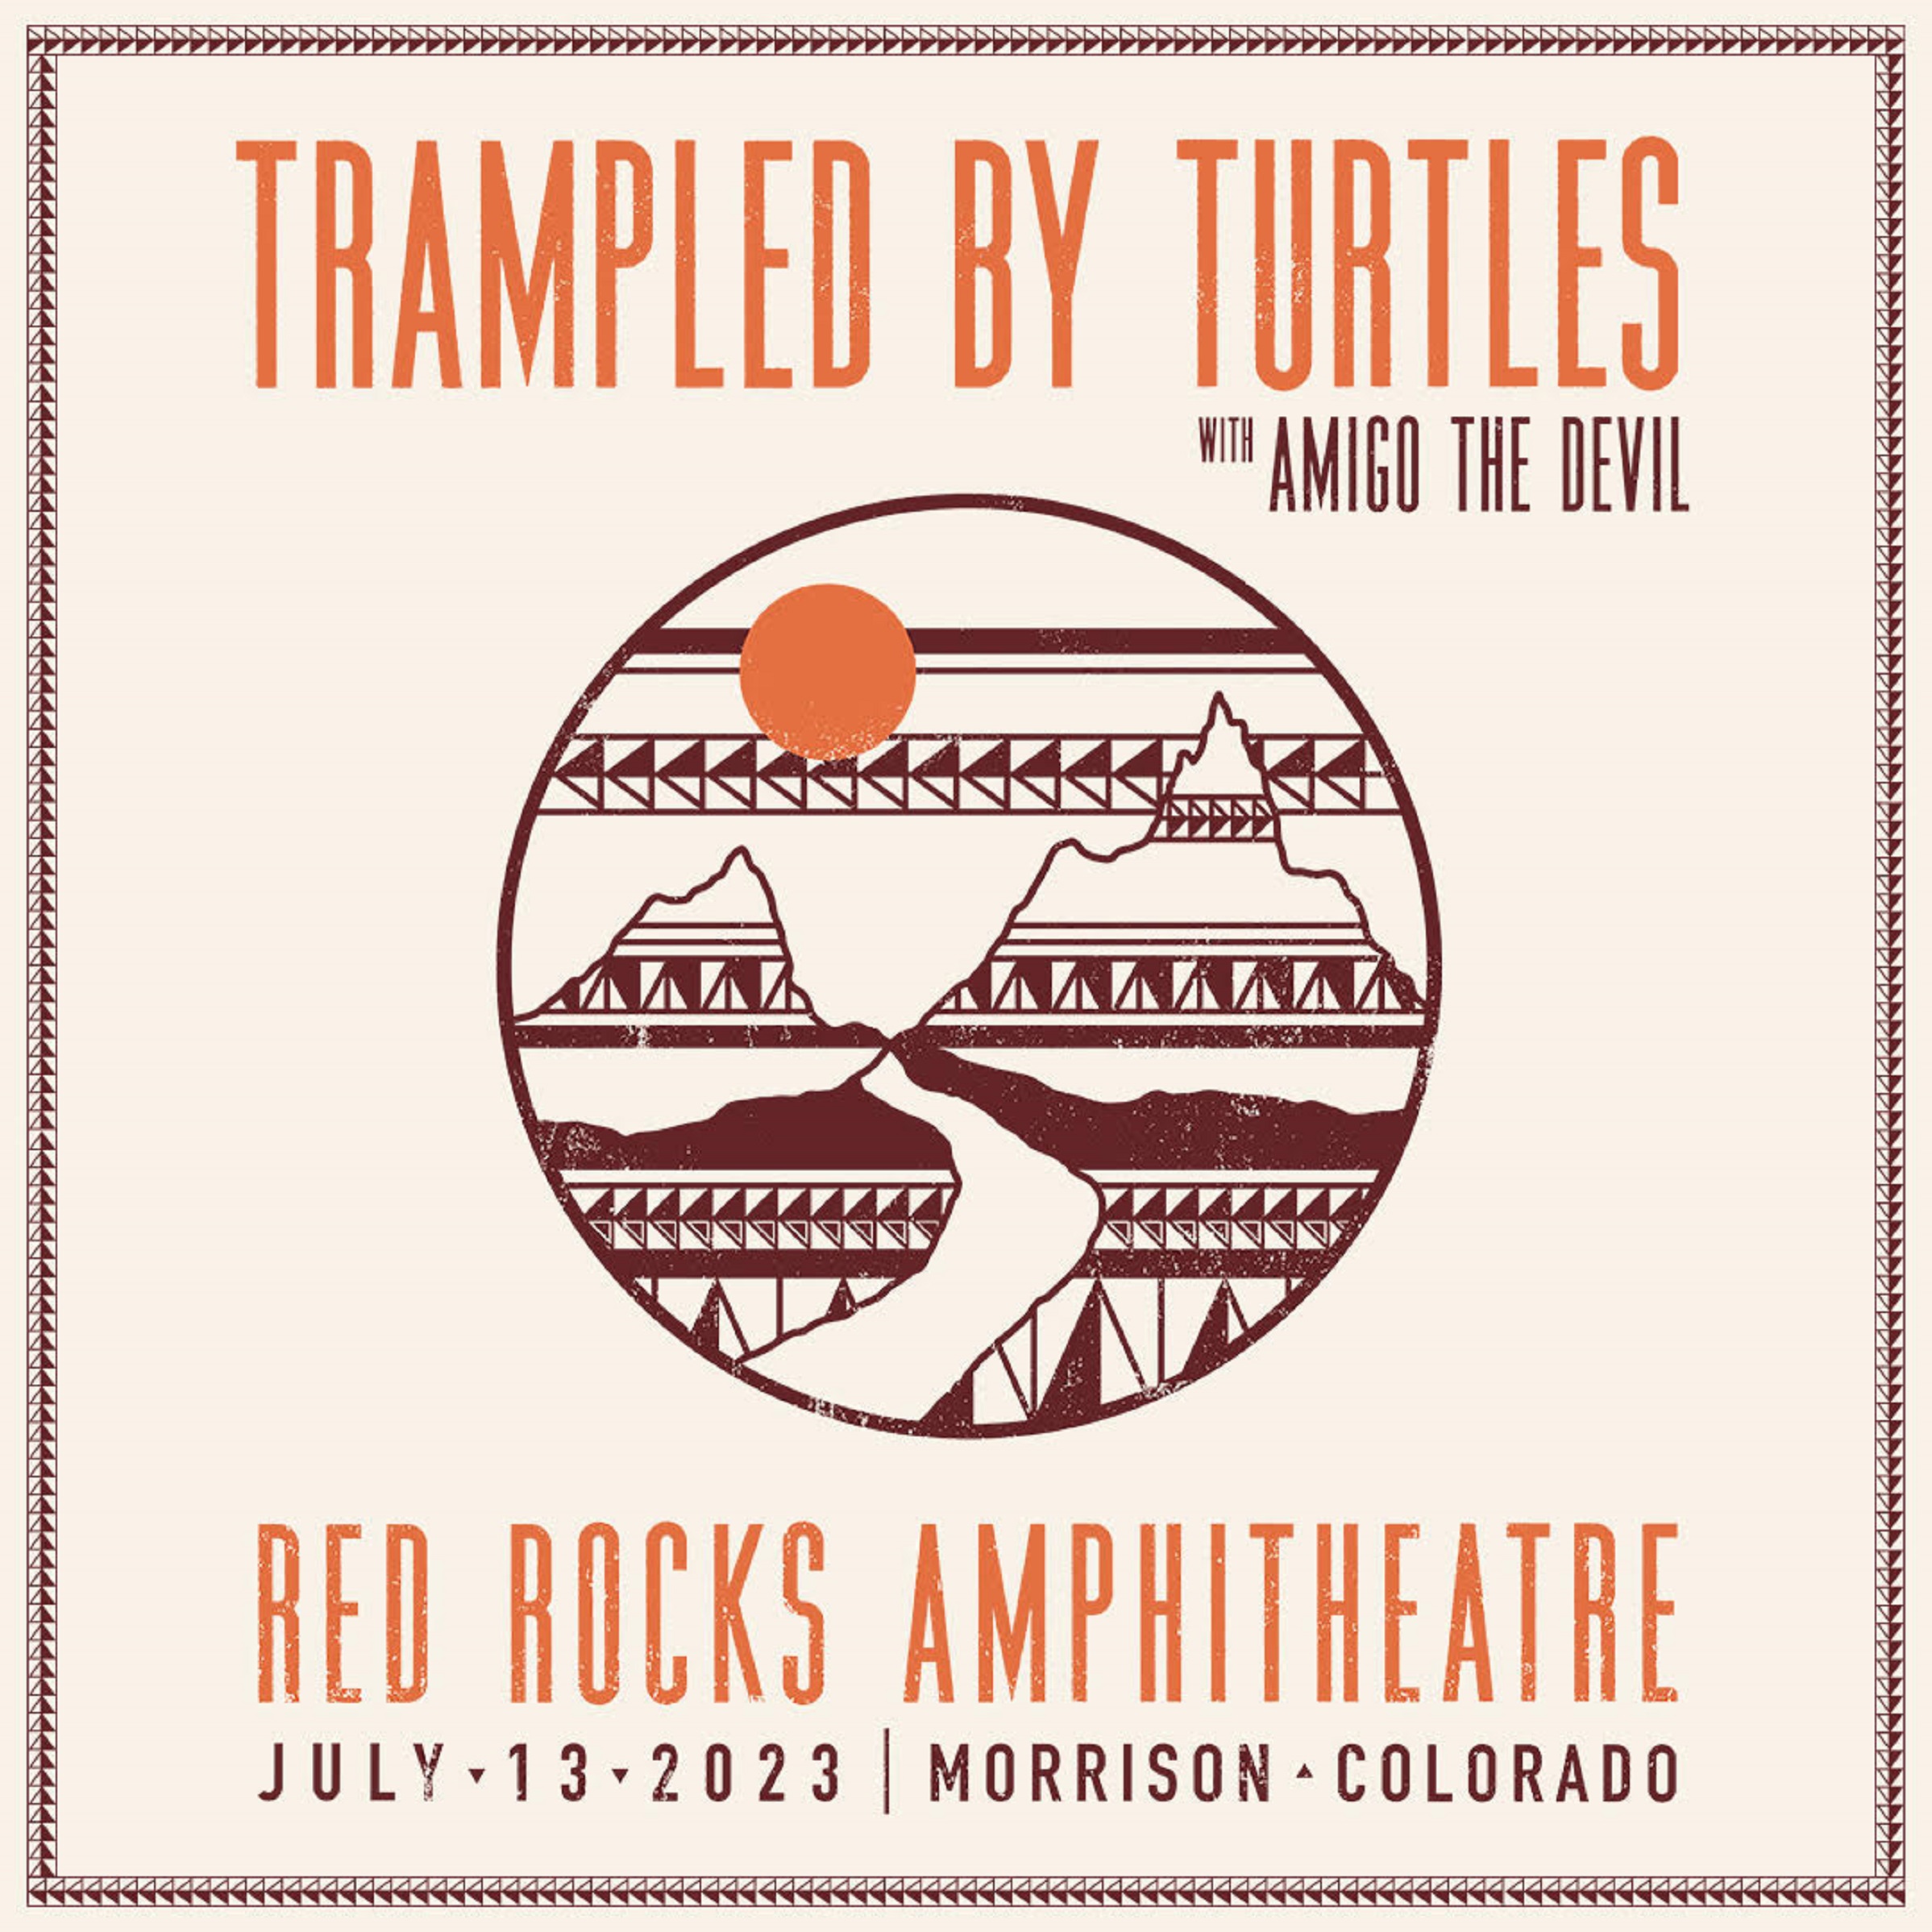 Trampled by Turtles announce Red Rocks Amphitheatre show - 7/13/23